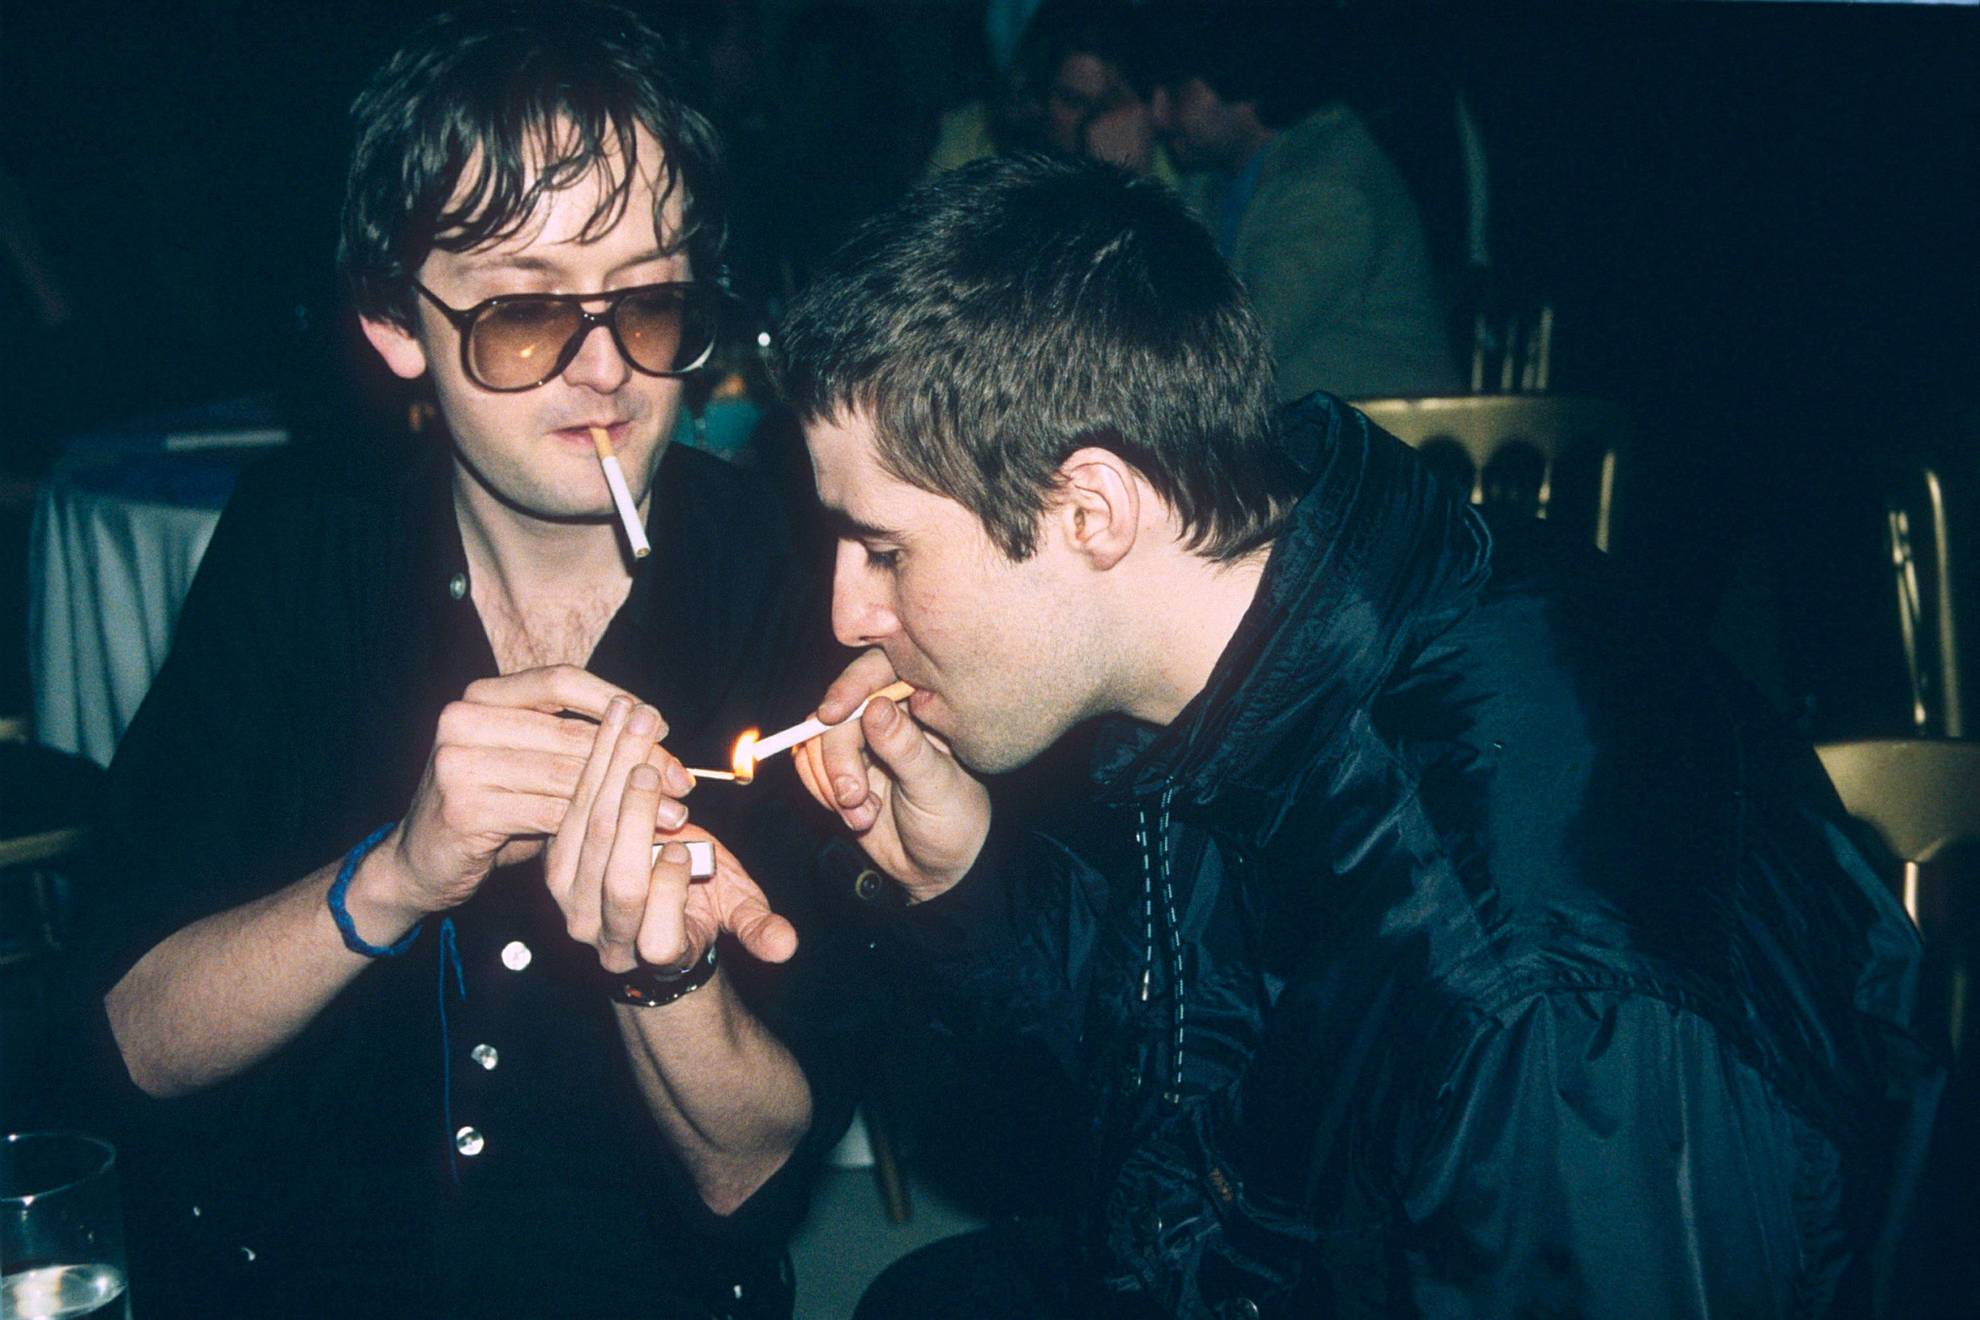 Cocker and Noel Gallagher smoking together